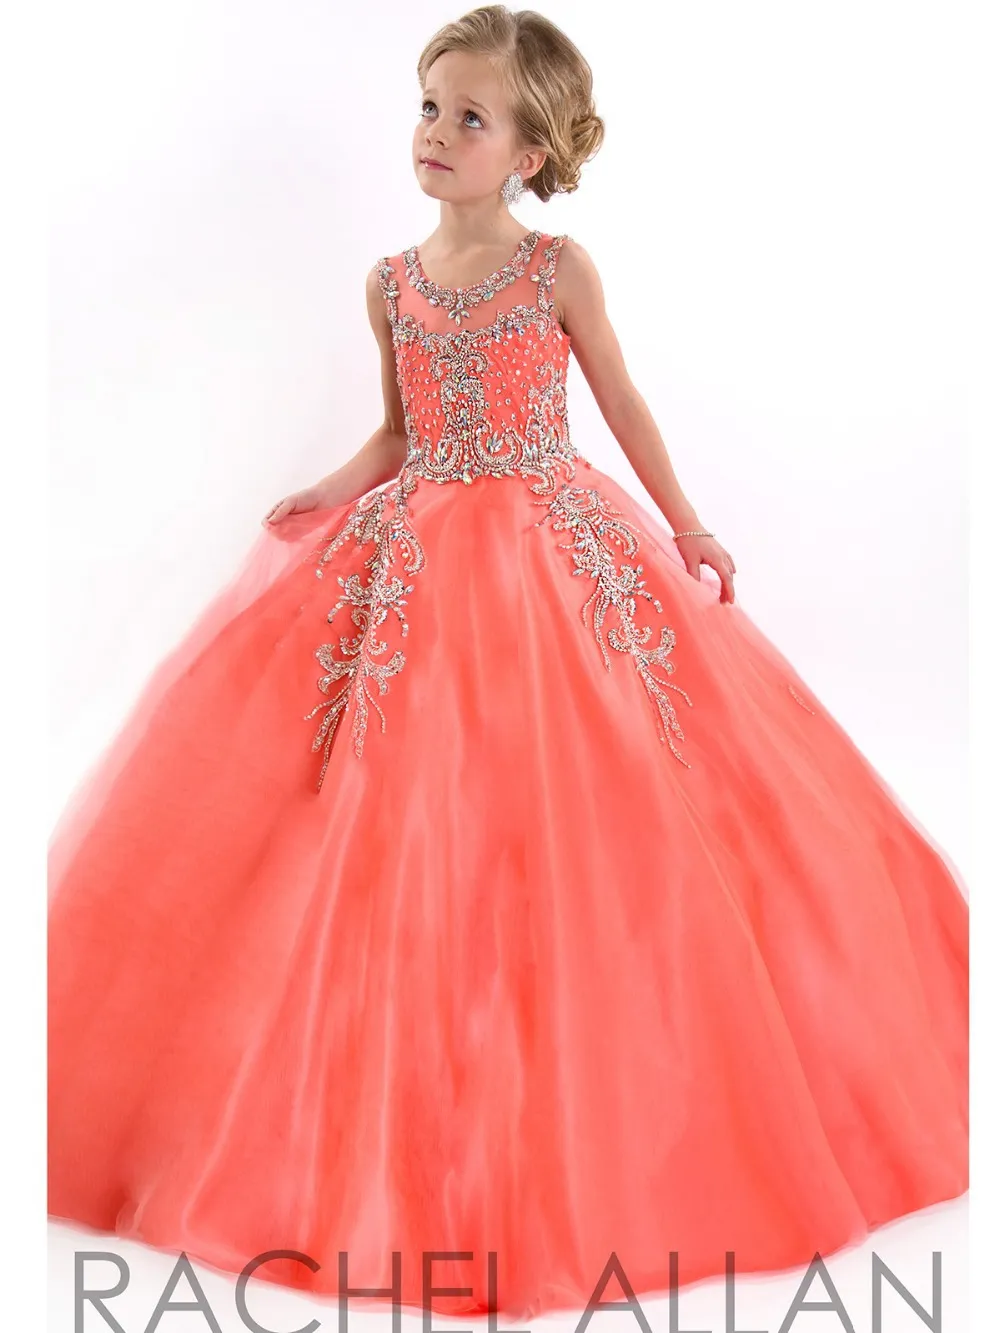 Little Girls Pageant Dresses For Teens Princess Rachel Allan Jewel Crystal Beading White Coral Kids Flower Birthday Gowns HY00731